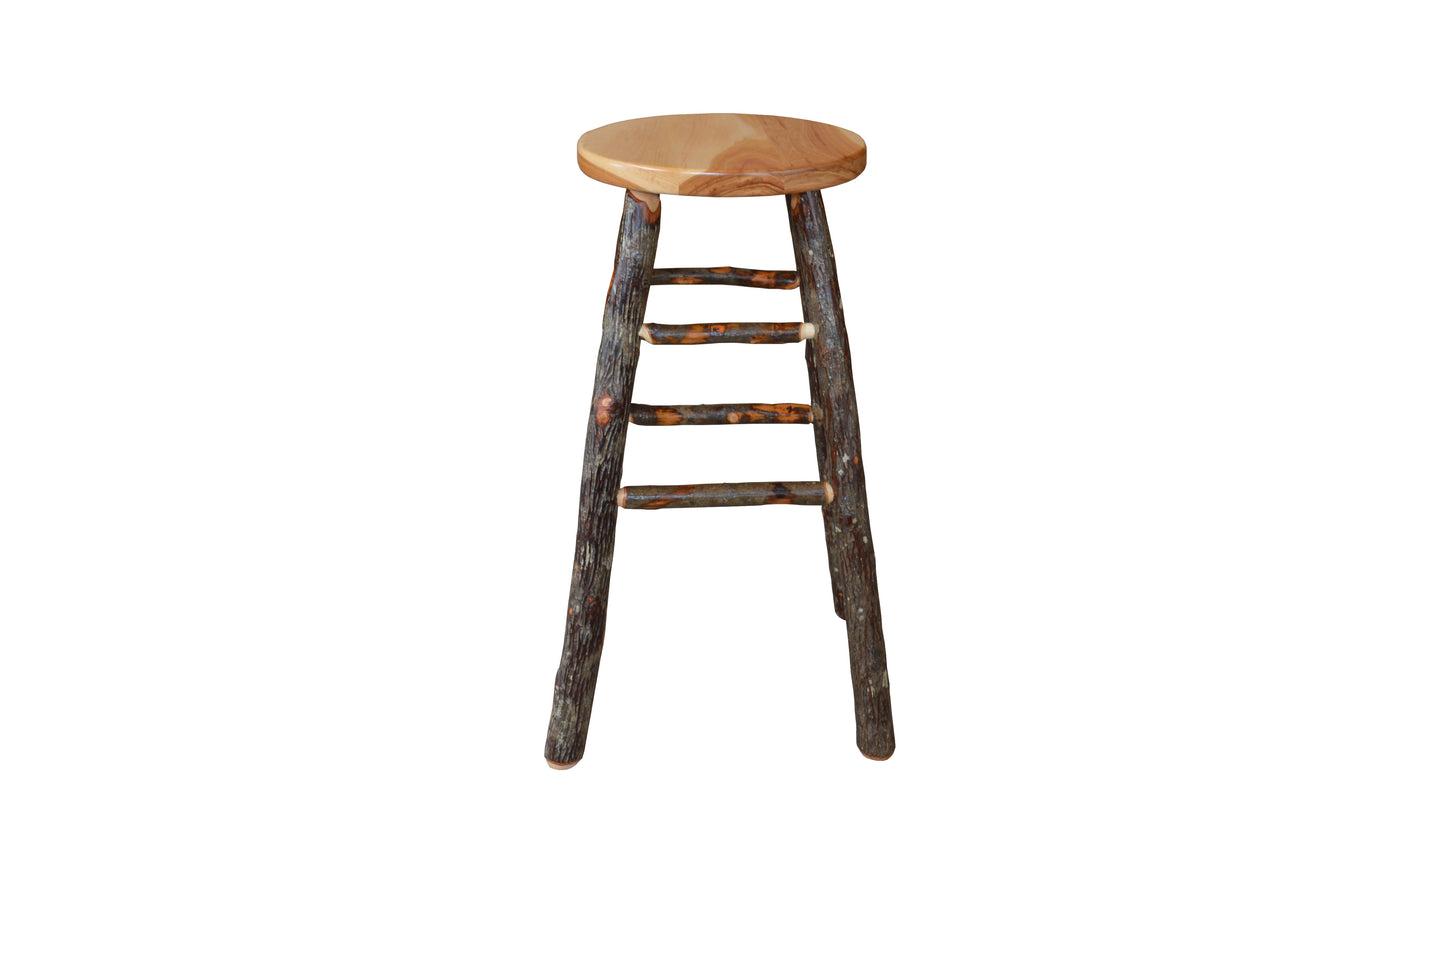 A&L Furniture Co. Hickory Bar Stool - LEAD TIME TO SHIP 4 WEEKS OR LESS